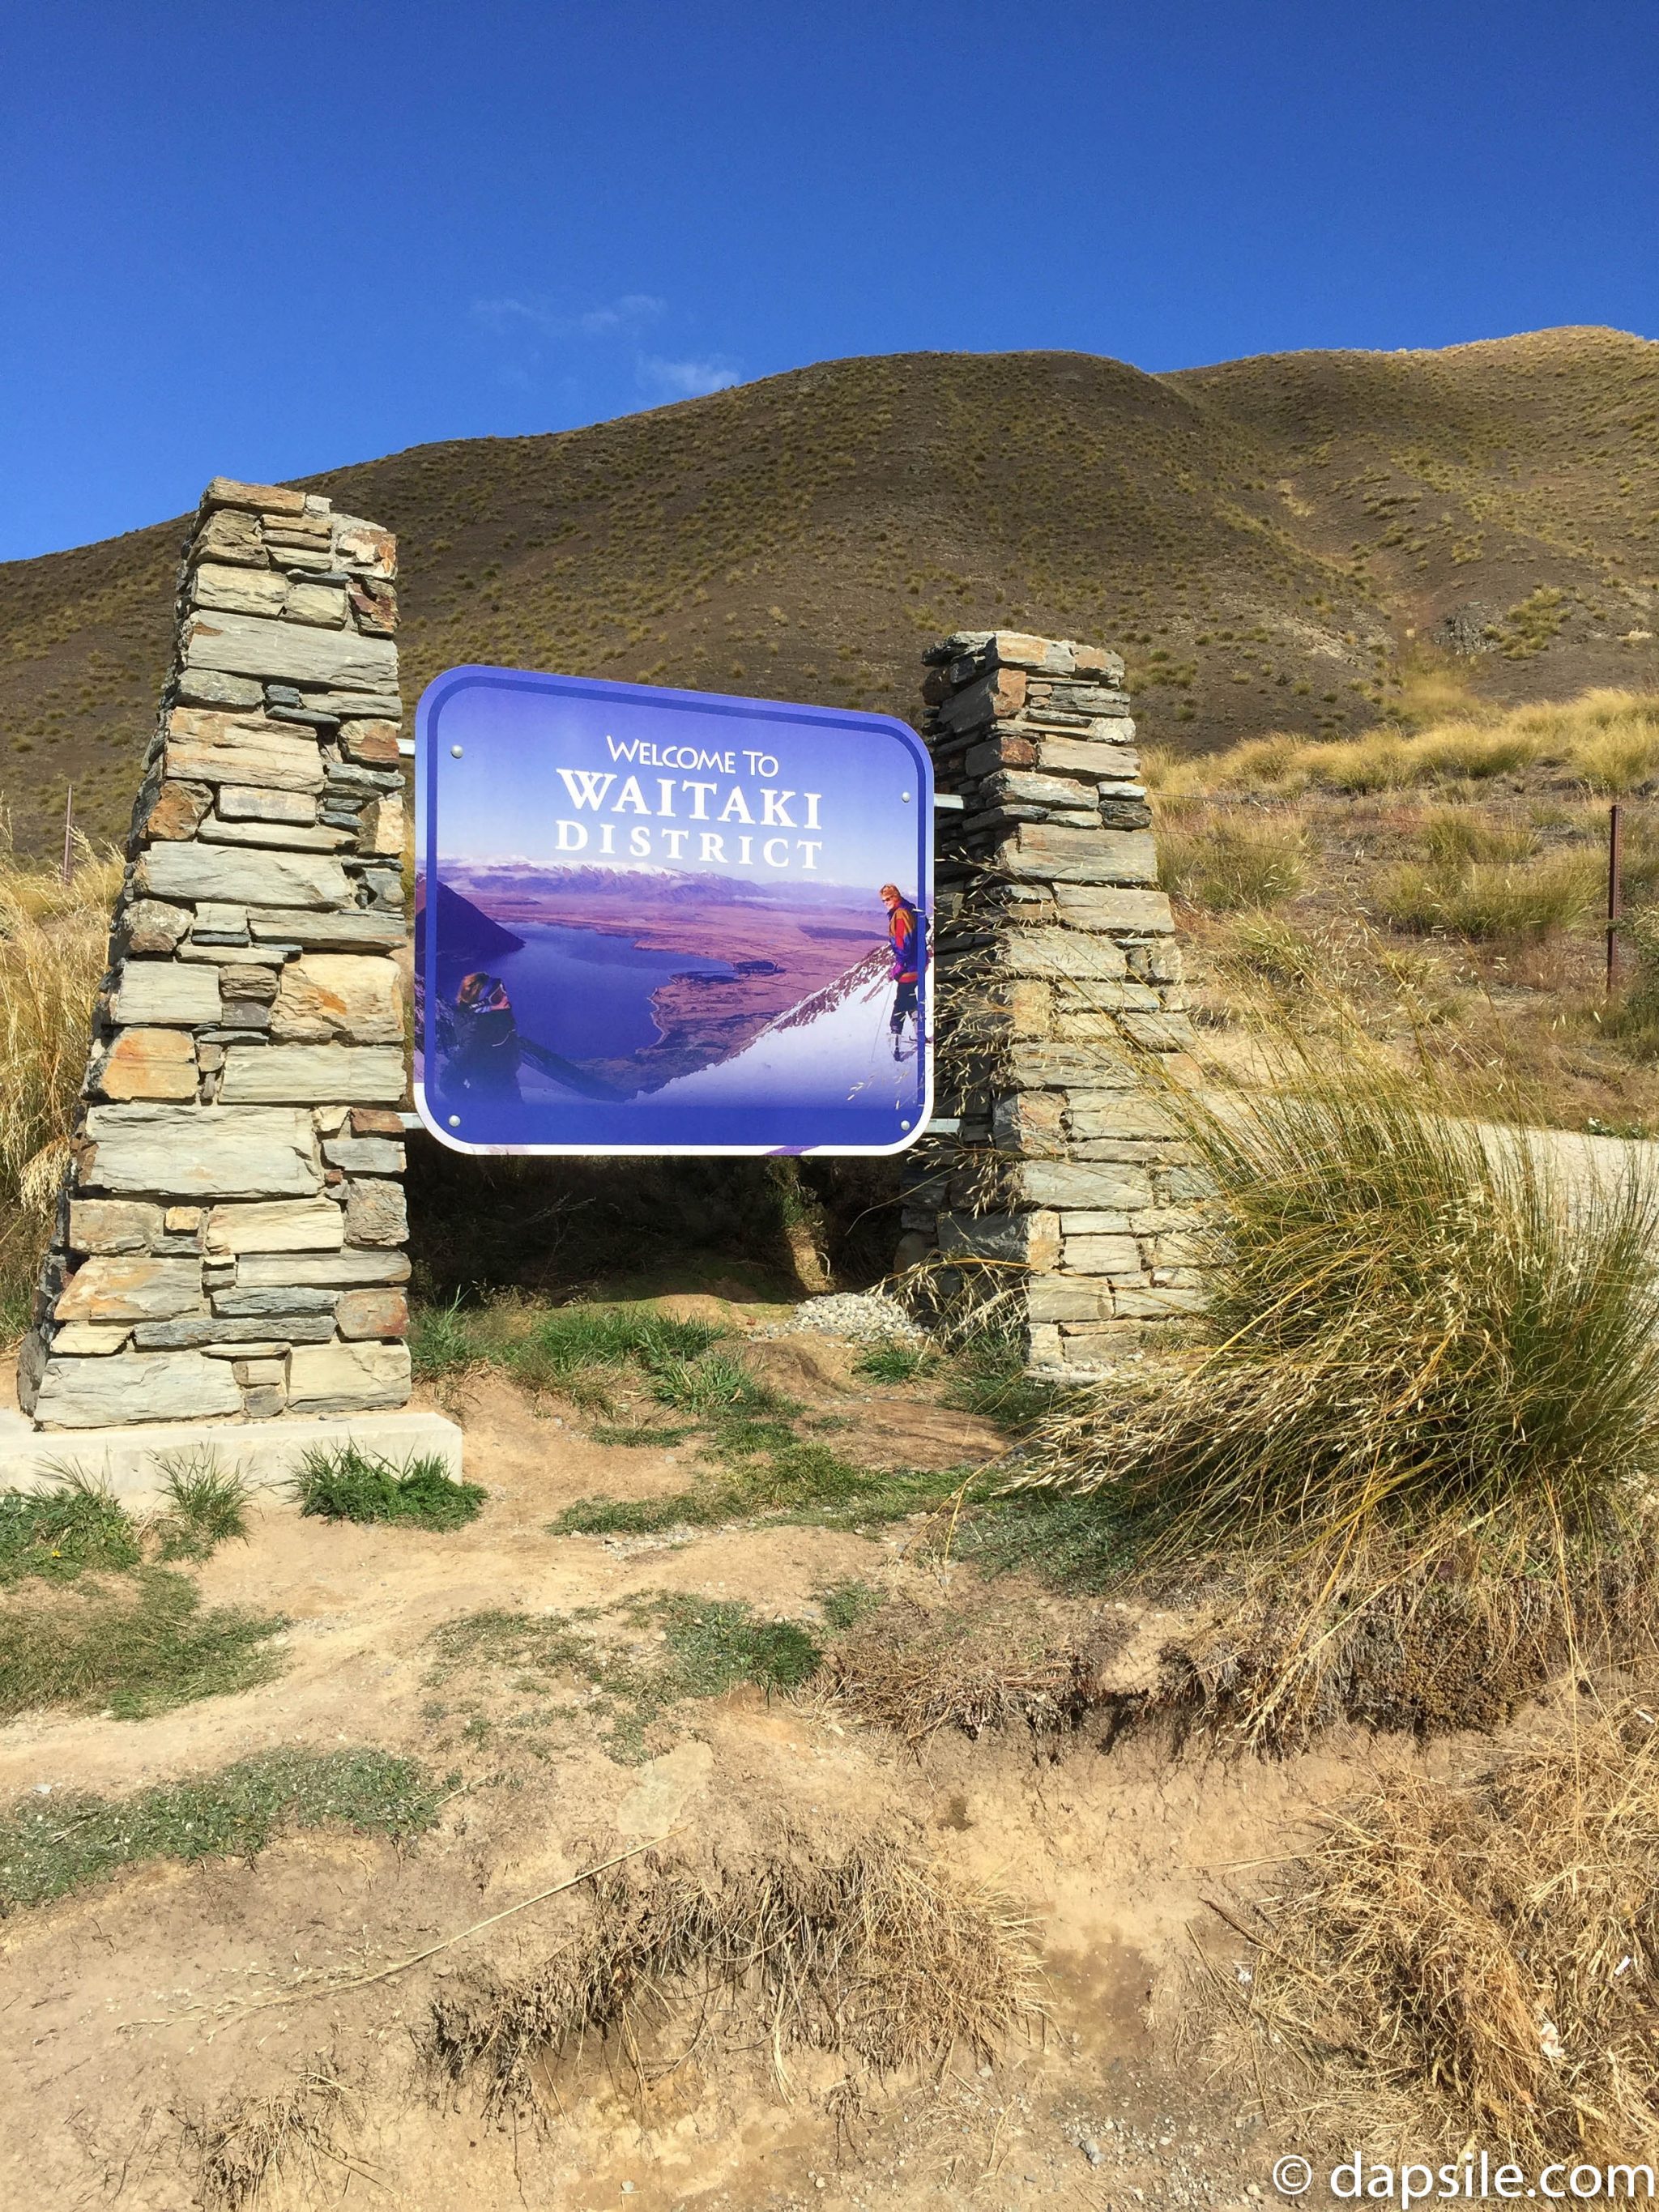 Welcome to Waitaki District sign in NZ on the side of the road with mountains in the background